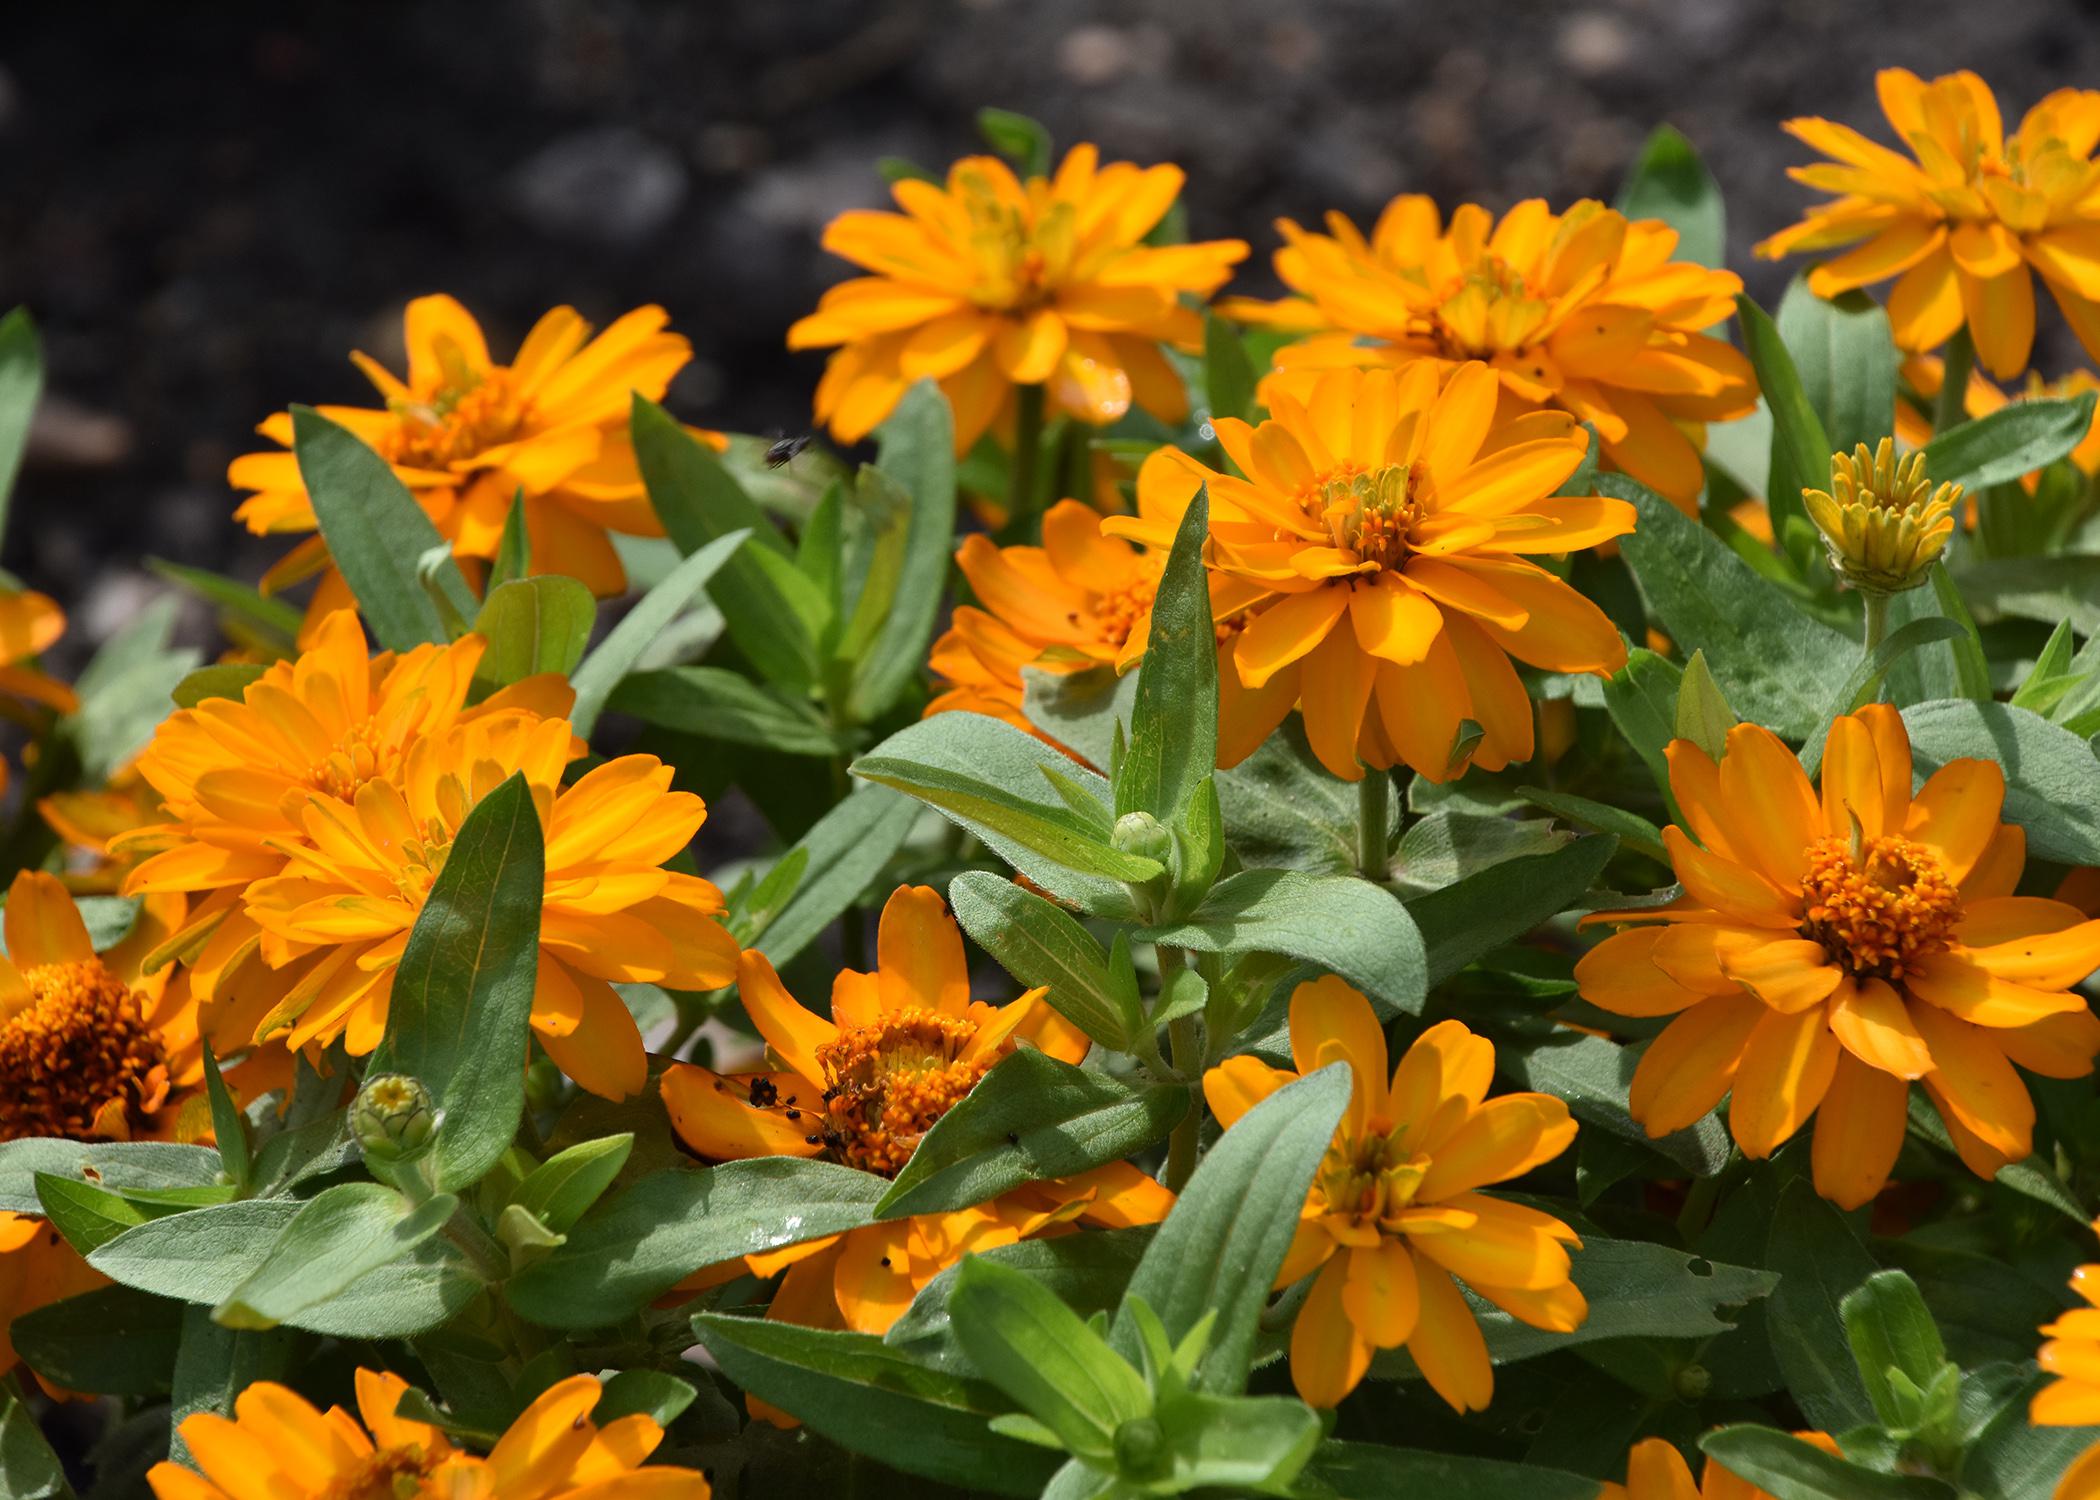 Orange blooms cover the top of a green plant.